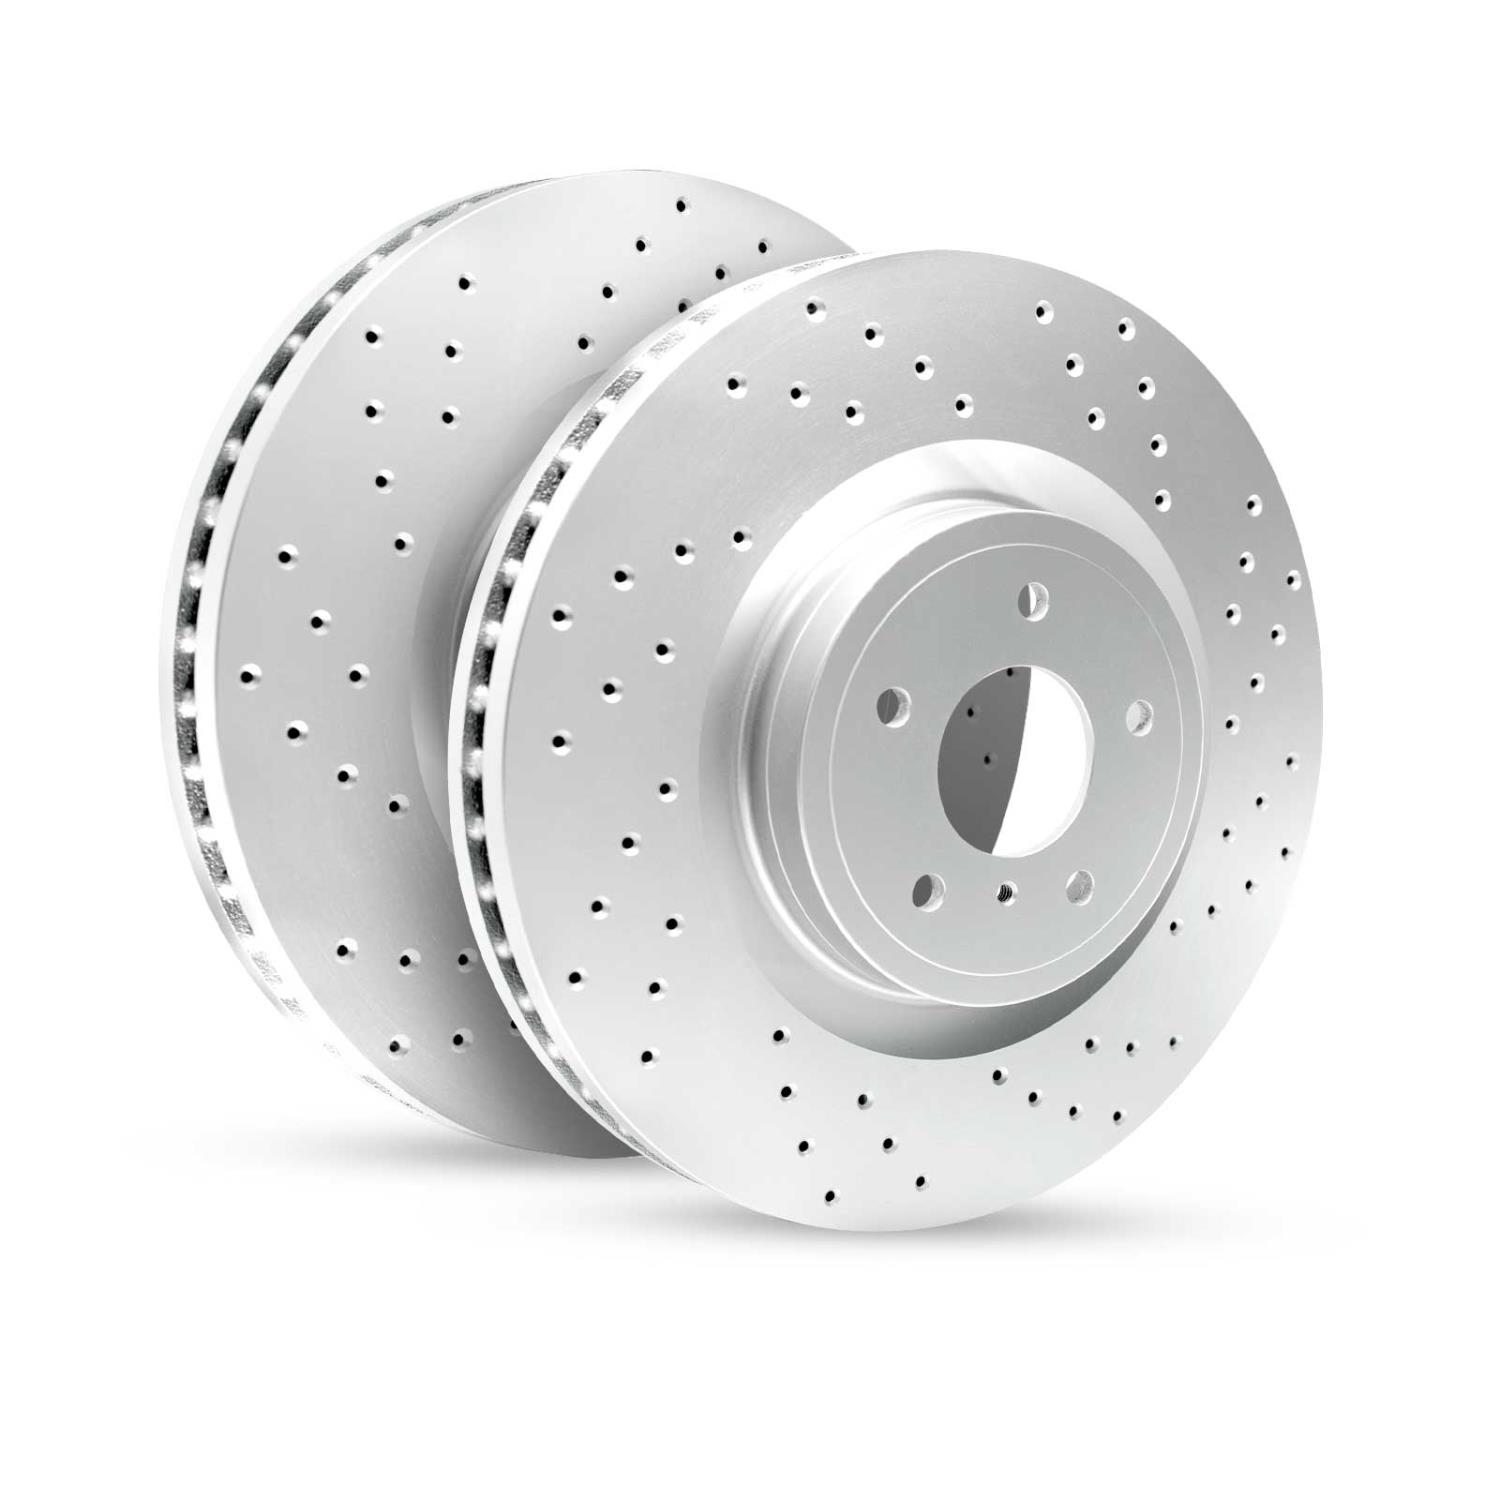 GEO-Carbon Drilled/Slotted Rotors, 1996-2003 BMW, Position: Rear